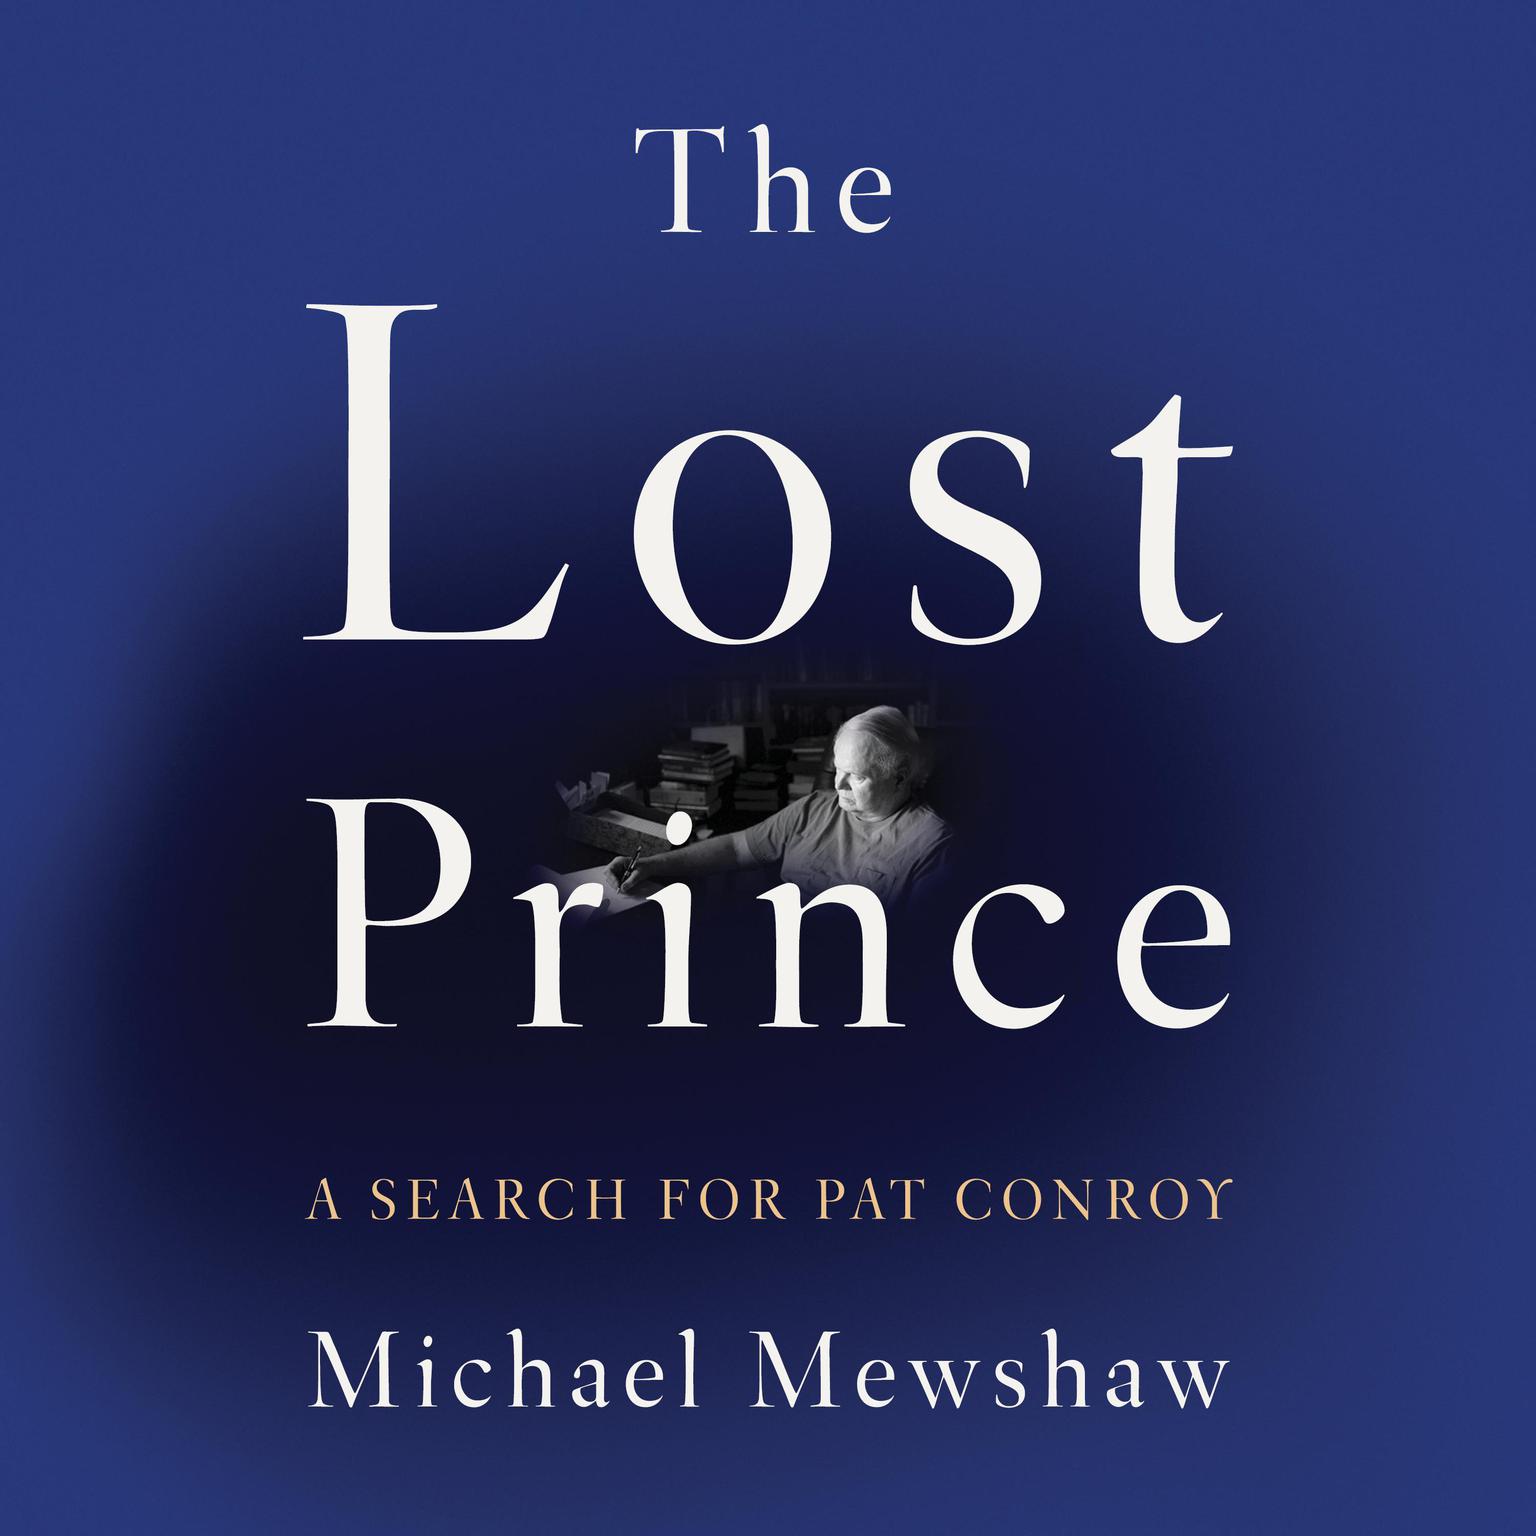 The Lost Prince: A Search for Pat Conroy Audiobook, by Michael Mewshaw